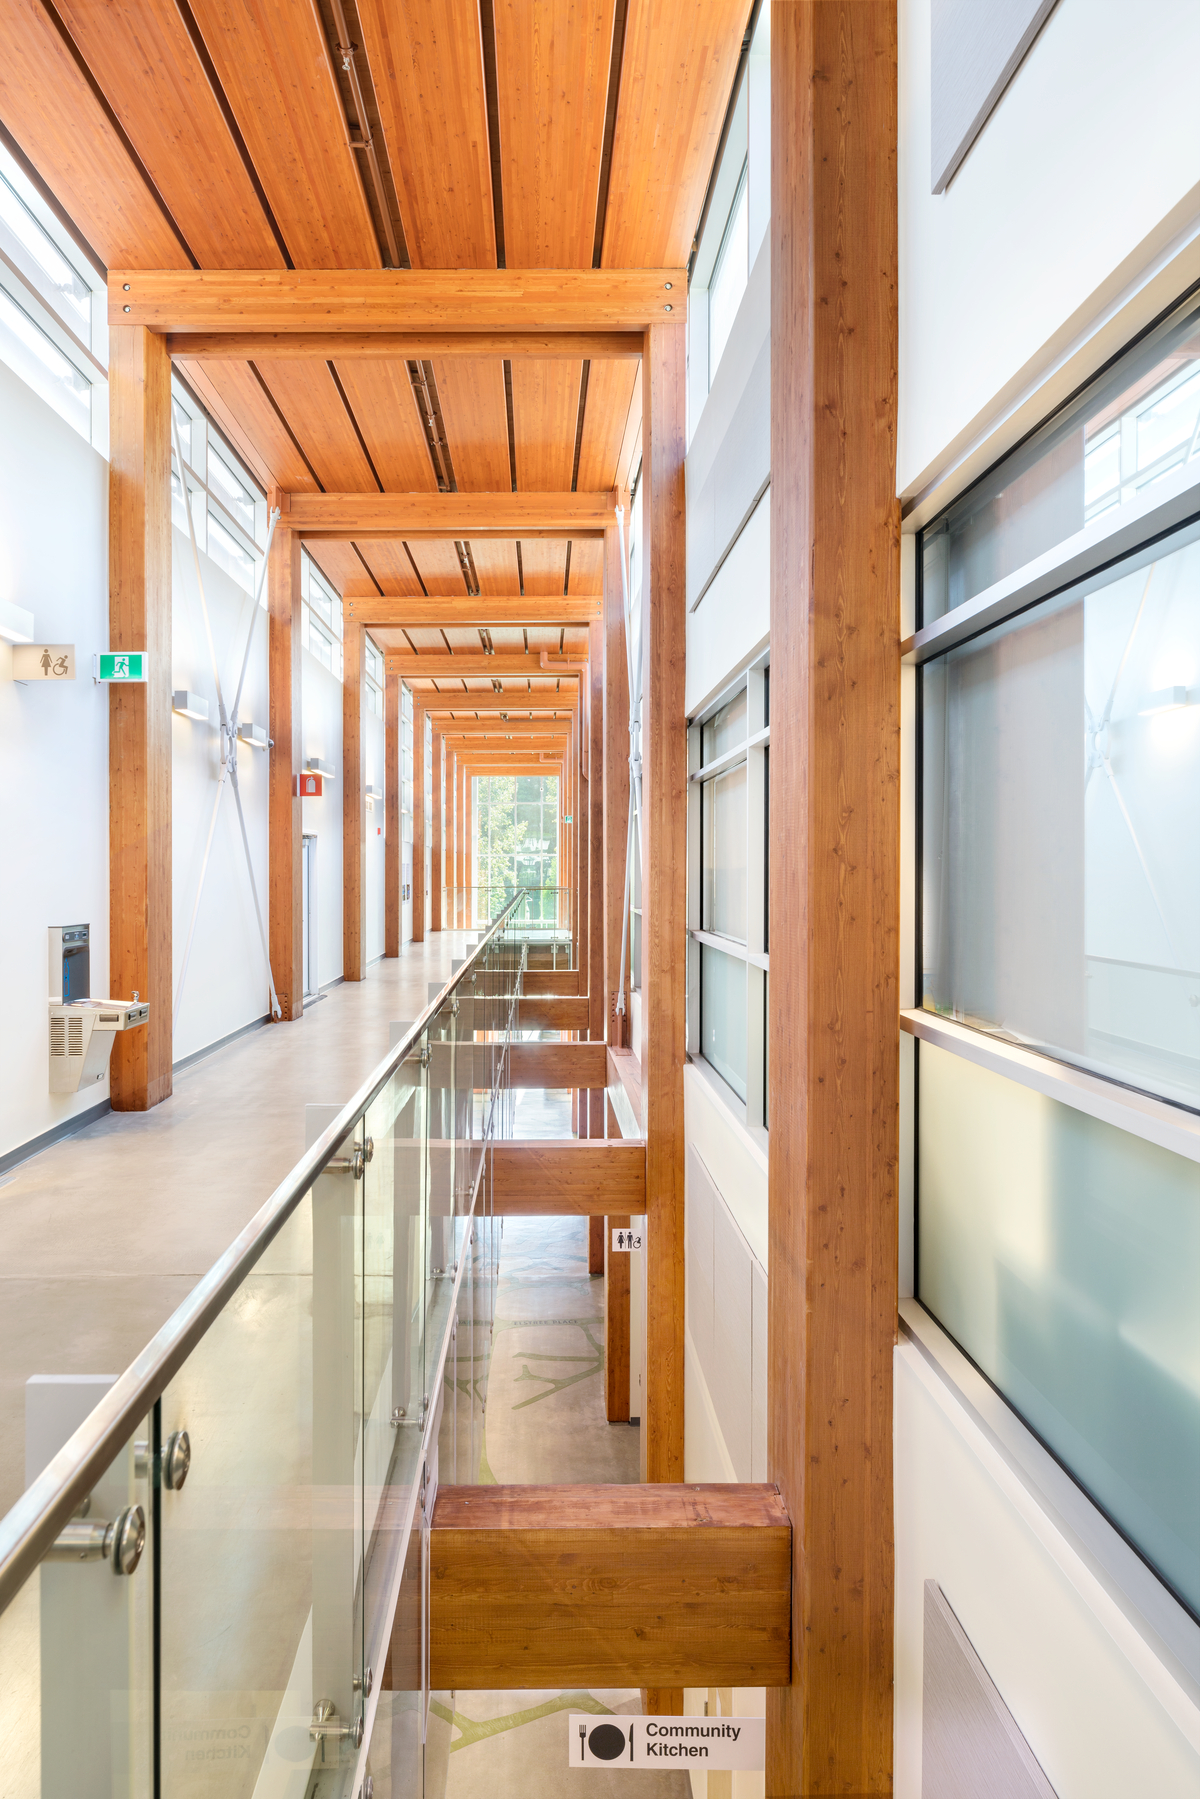 Interior view of Delbrook Community Recreation Centre multi storey main hallway from top floor, showing aesthetic wood planking overhead supported by glue-laminated timber (glulam) beams and columns